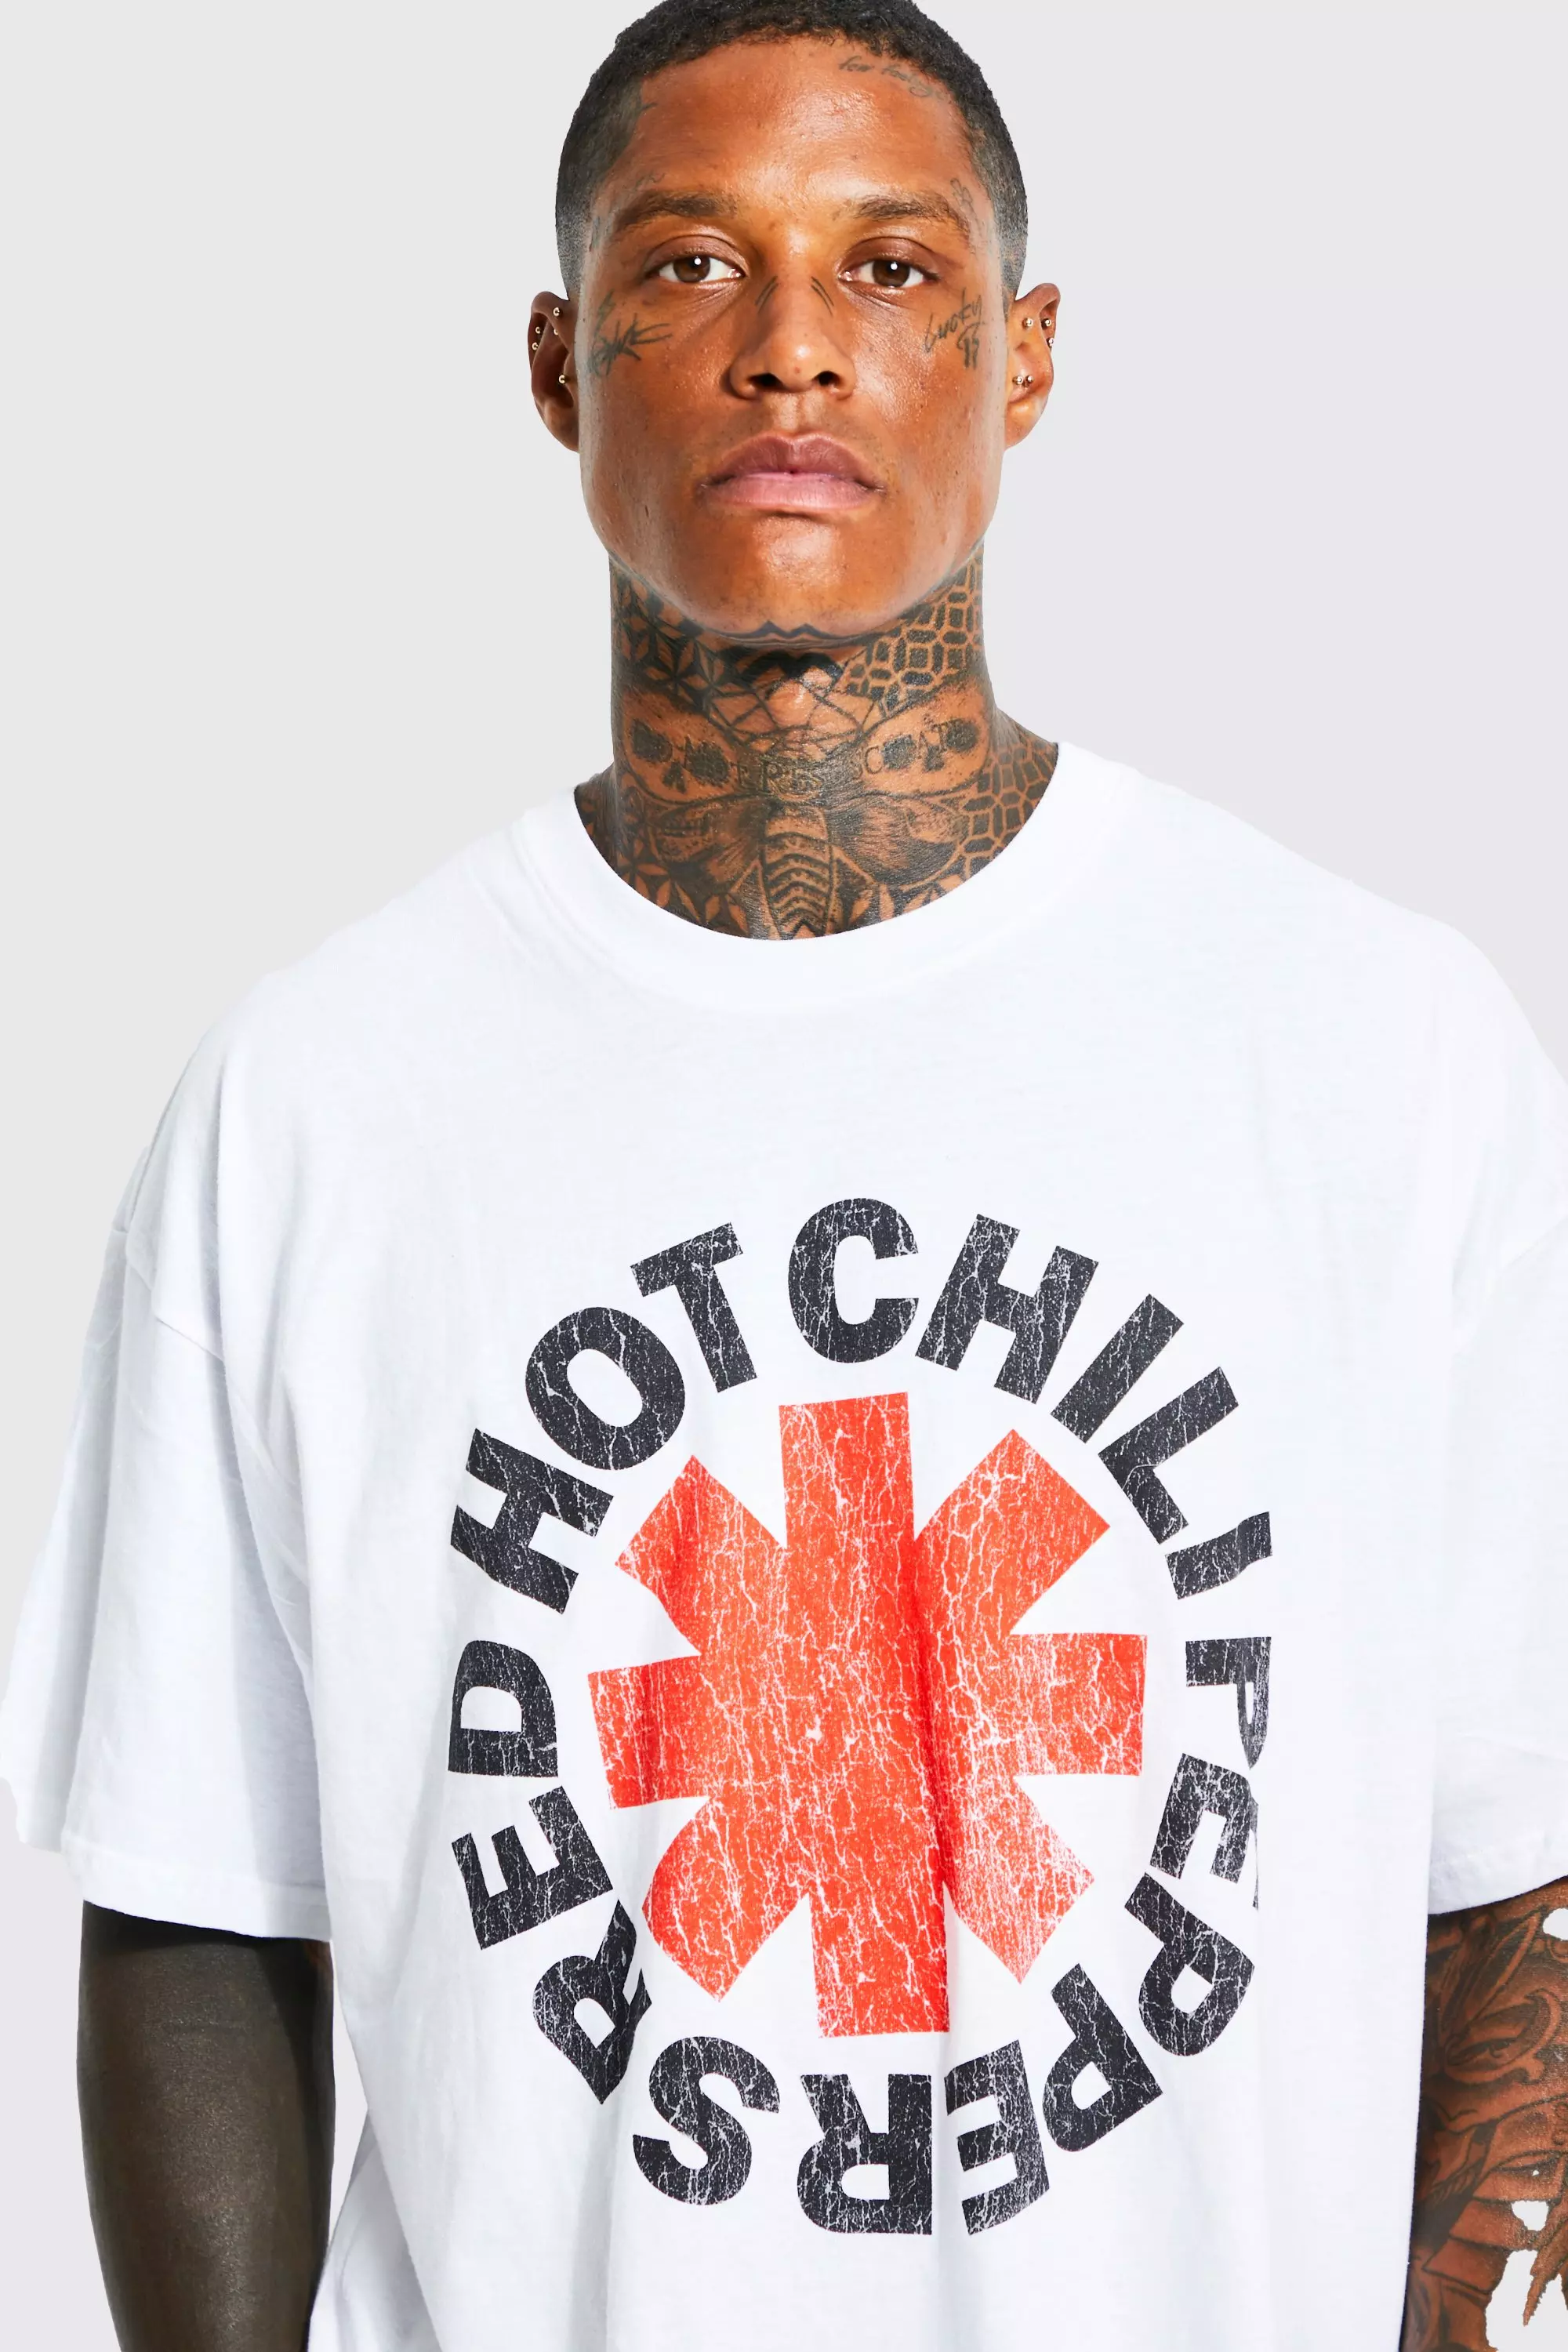 Oversized Red Hot Chili Peppers T-shirt